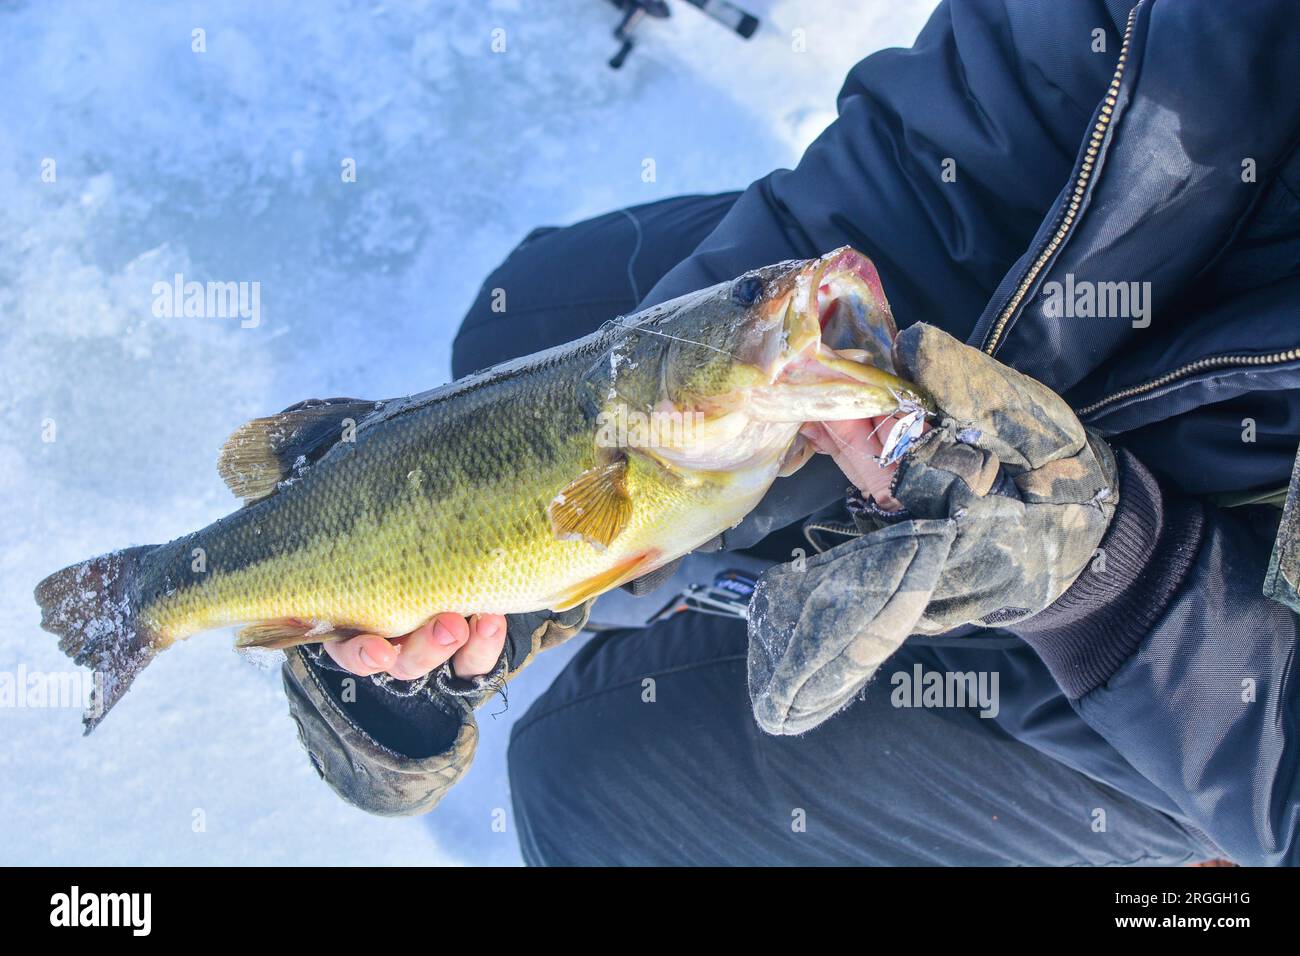 Winter activity Ice fishing, copy space natural background image Stock Photo